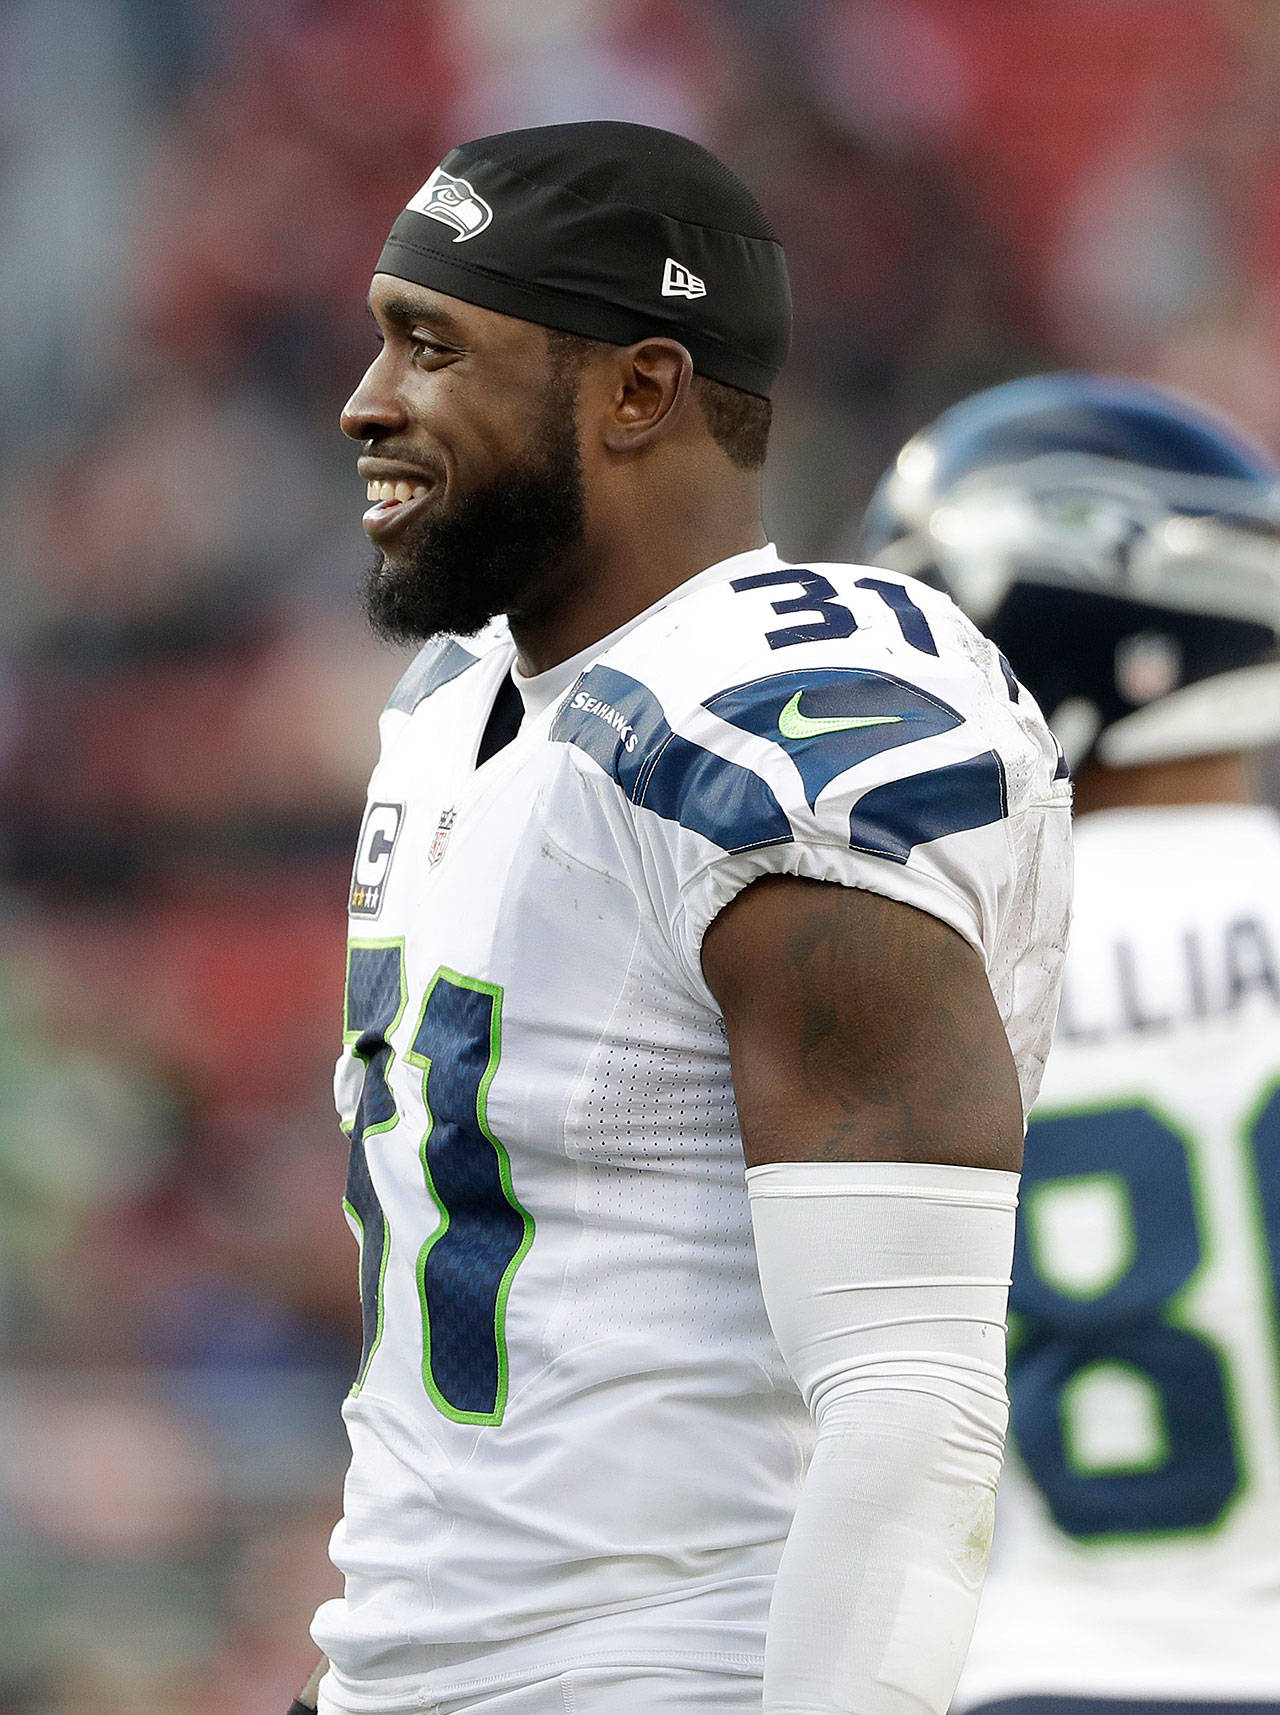 Seahawks strong safety Kam Chancellor (31) waits on the sideline during a game against the 49ers on Jan. 1, 2017, in Santa Clara, Calif. (AP Photo/Marcio Jose Sanchez)